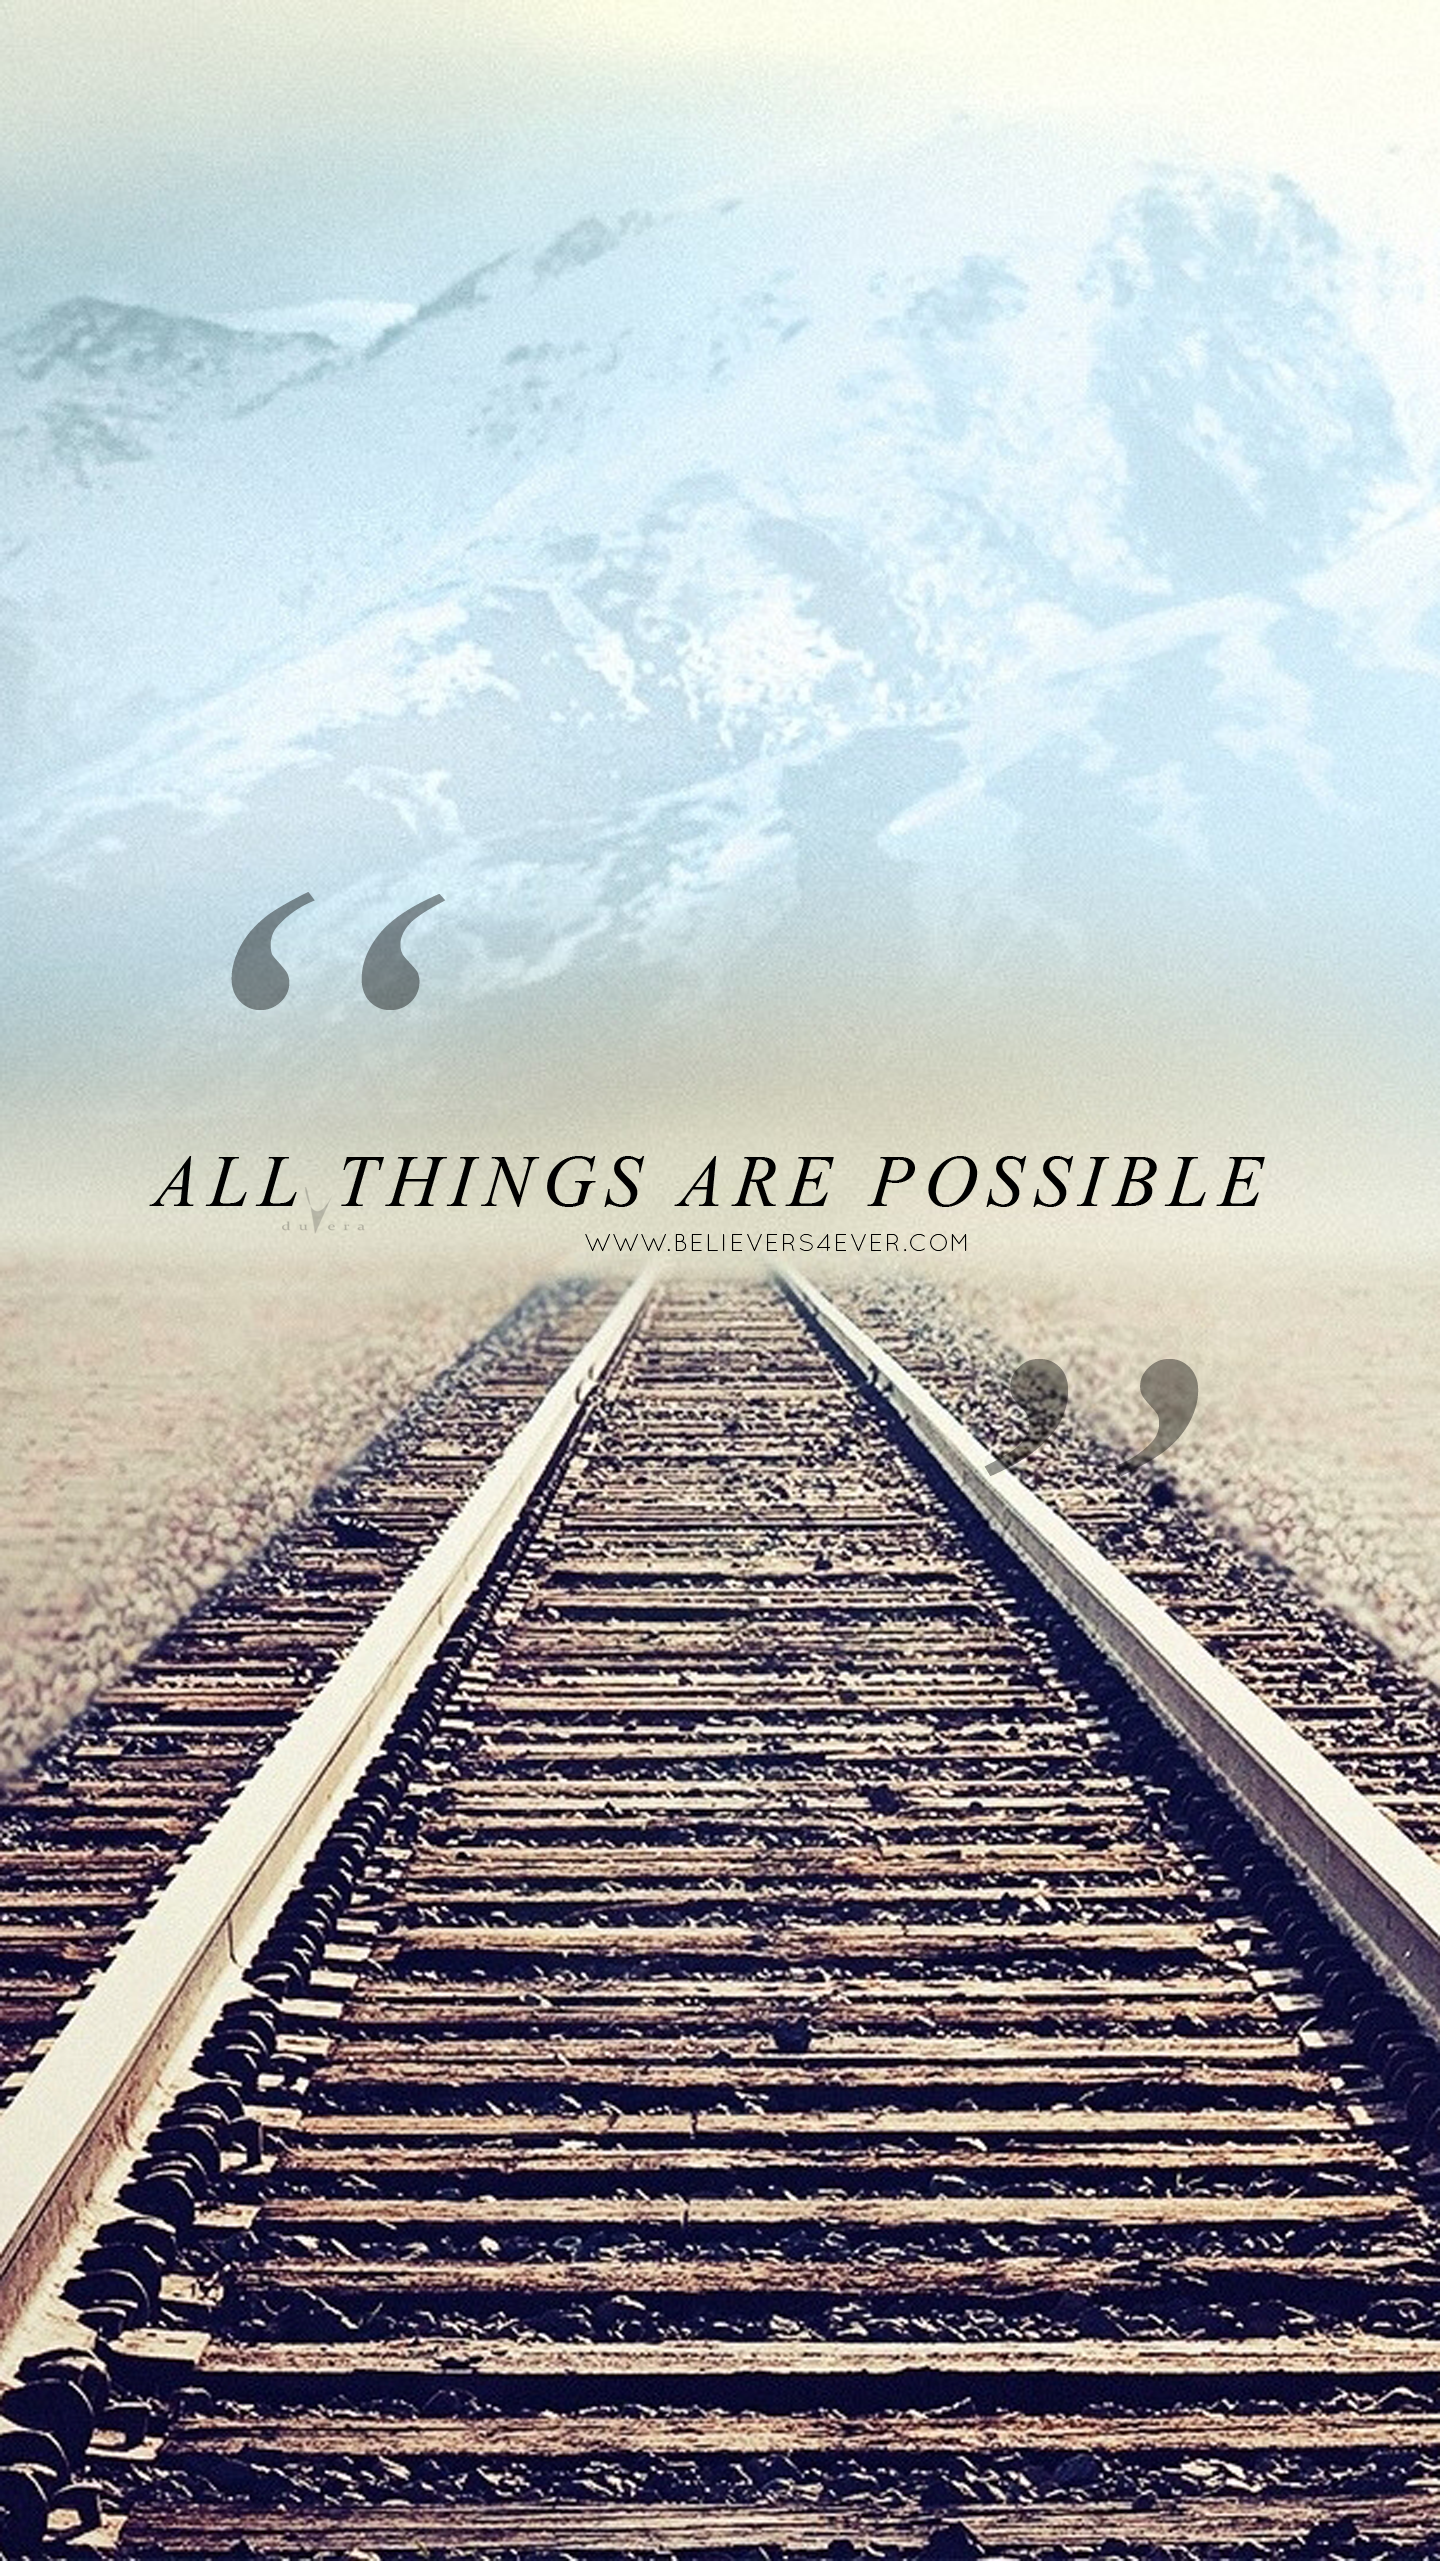 All Things Are Possible Christian Mobile Lock Screen Wallpaper